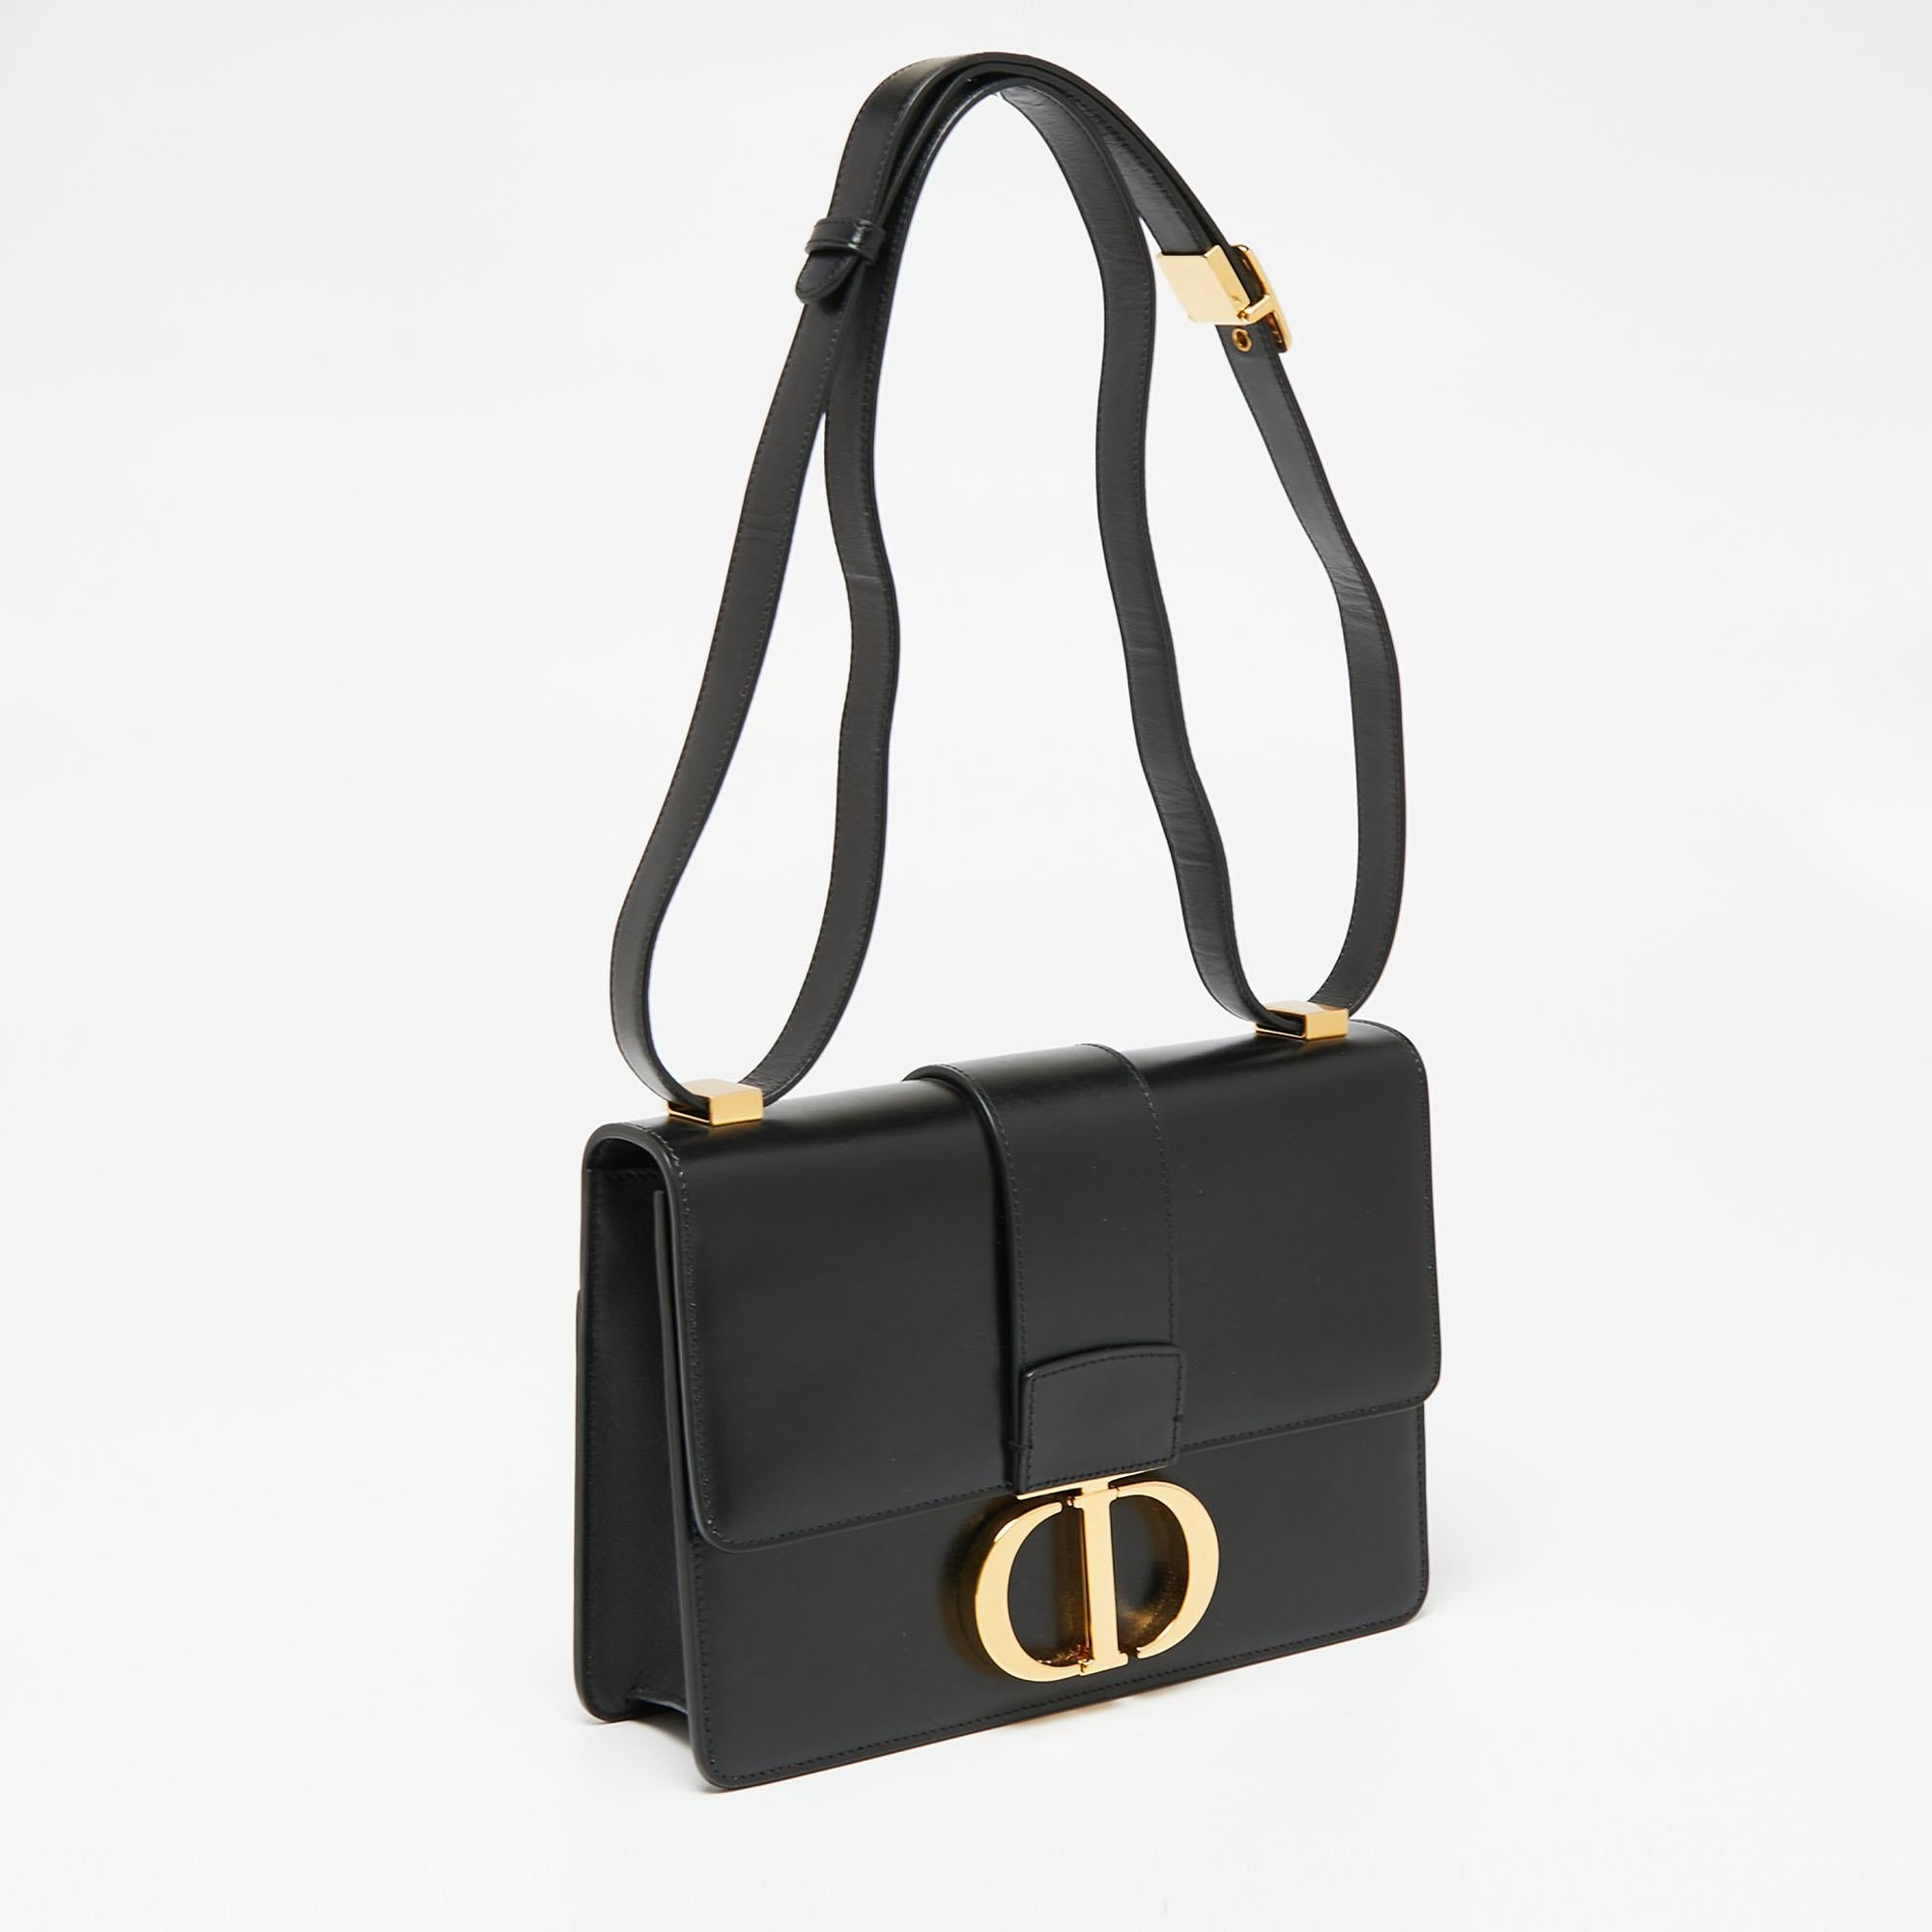 Inspired by the House's hallmark address, this Dior 30 Montaigne shoulder bag is the true embodiment of grace and luxury. The bag features a black leather exterior and a gold-toned CD metal clasp on the front that derives its design from the seal of